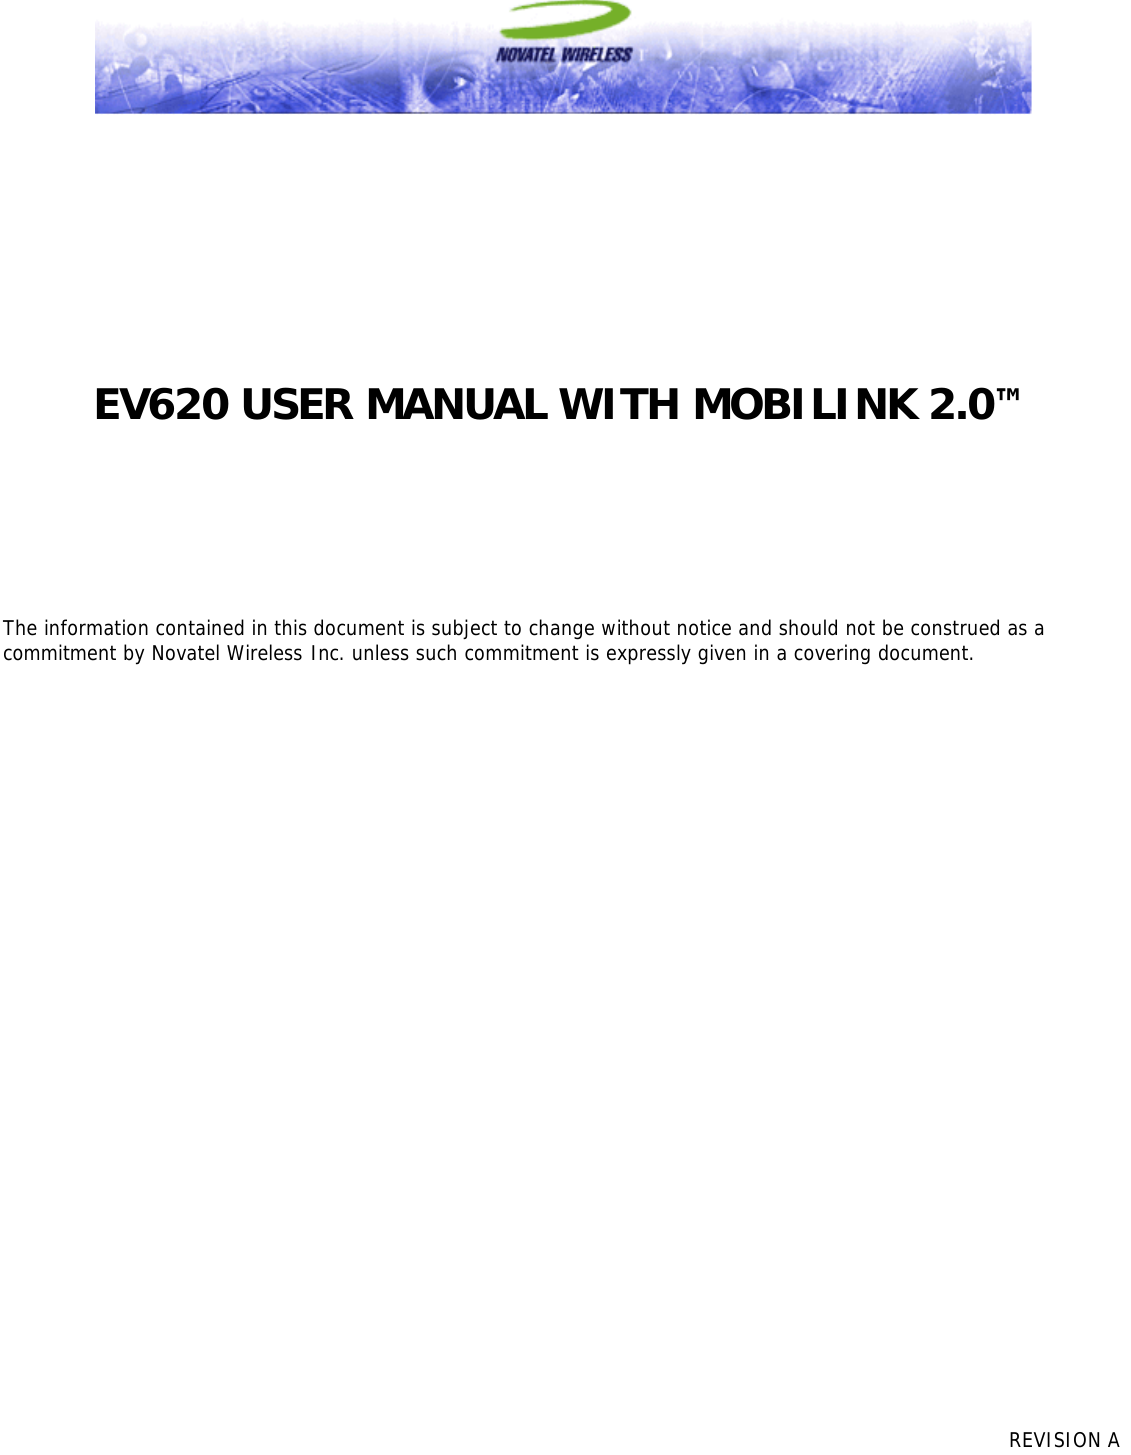          REVISION A                  EV620 USER MANUAL WITH MOBILINK 2.0™       The information contained in this document is subject to change without notice and should not be construed as a commitment by Novatel Wireless Inc. unless such commitment is expressly given in a covering document. 